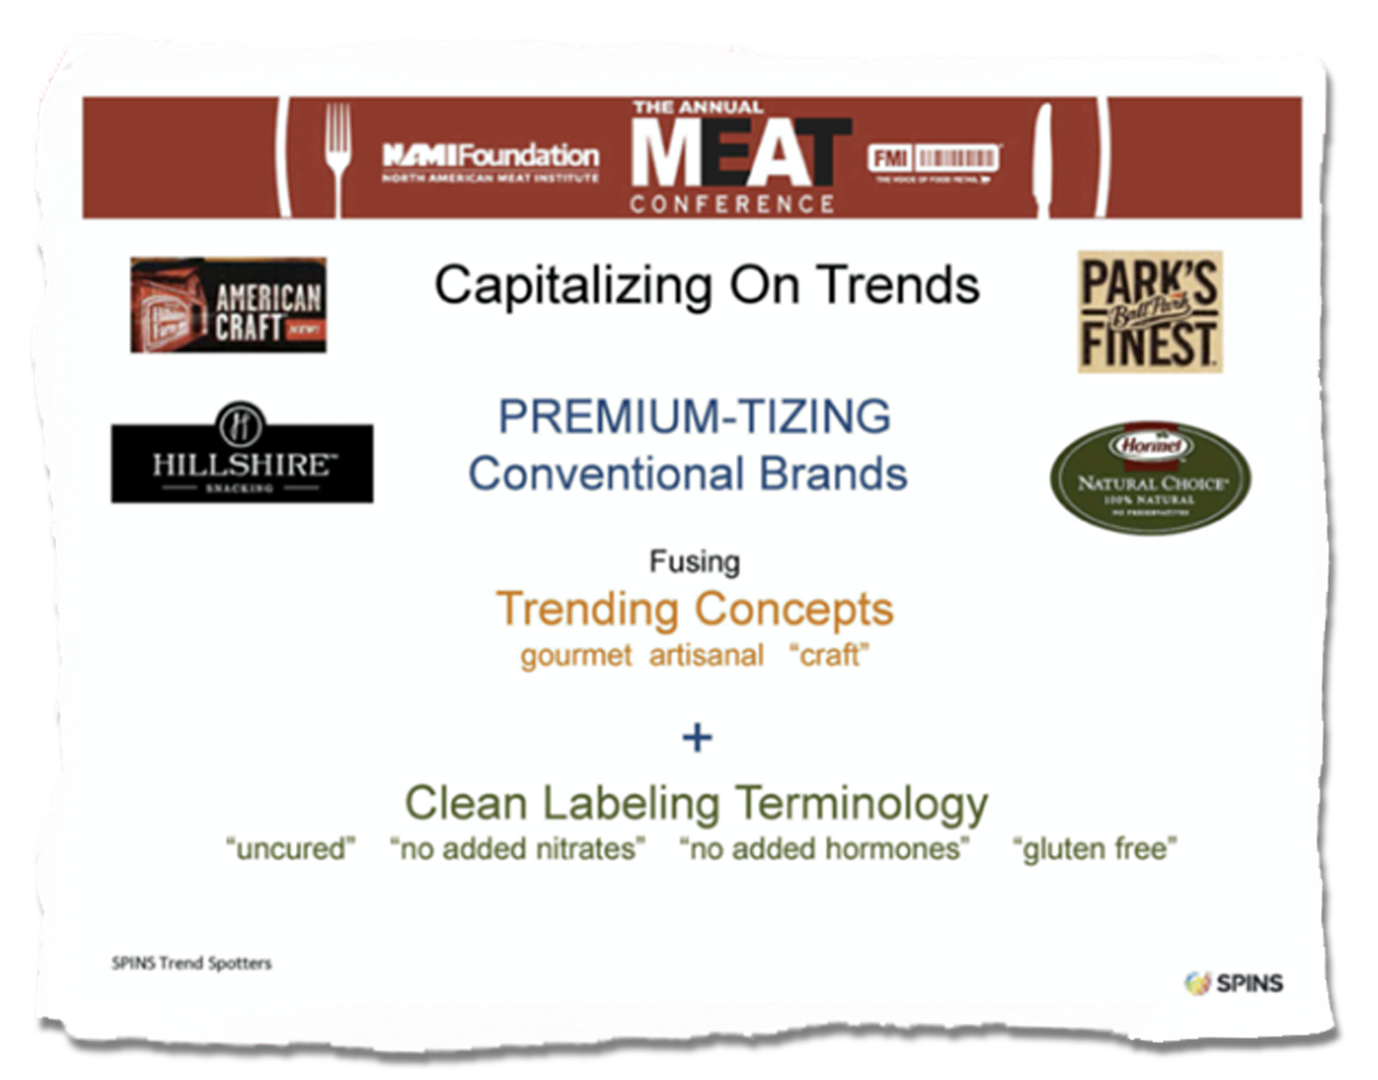 A slide from the annual "Meat Conference" sponsored by the NAMI Foundation and FMI, produced by SPINS. The slide has a red banner on top, and the content says "Capitalizing on trends: premium-tizing conventional brands, fusing trending concepts (gourmet artisinal craft) plus clean labeling terminology (uncured, no added nitrates, no added hormones, gluten free). There are four logos for meat brands including "american craft," "hillshire," "park's finest," and hormel "natural choice."